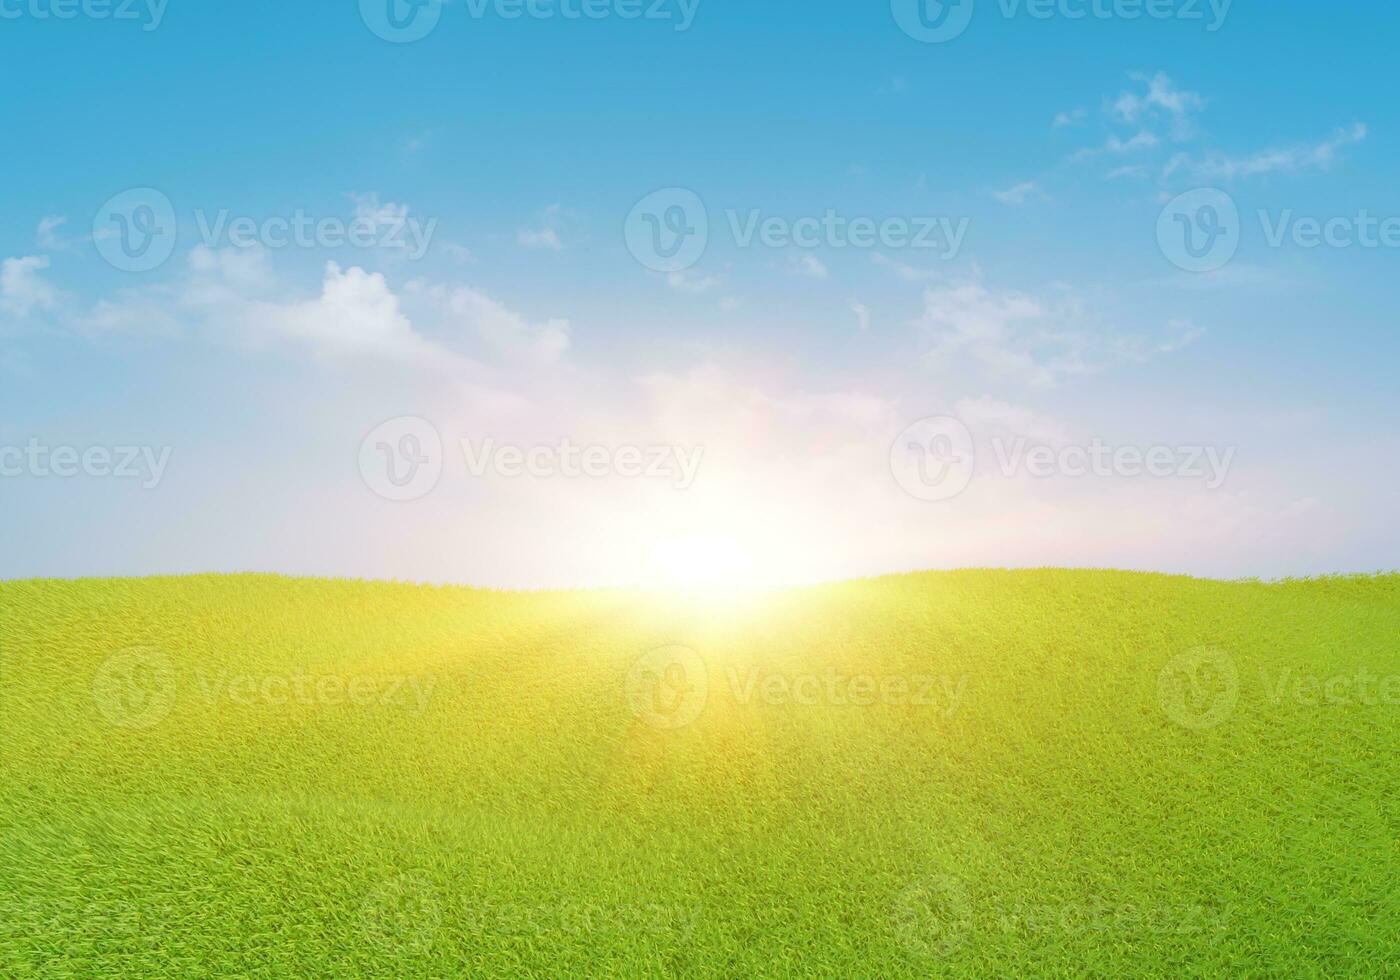 3d rendering. Green grass field with clouds and sun over blue sky background. Nature landscape. photo